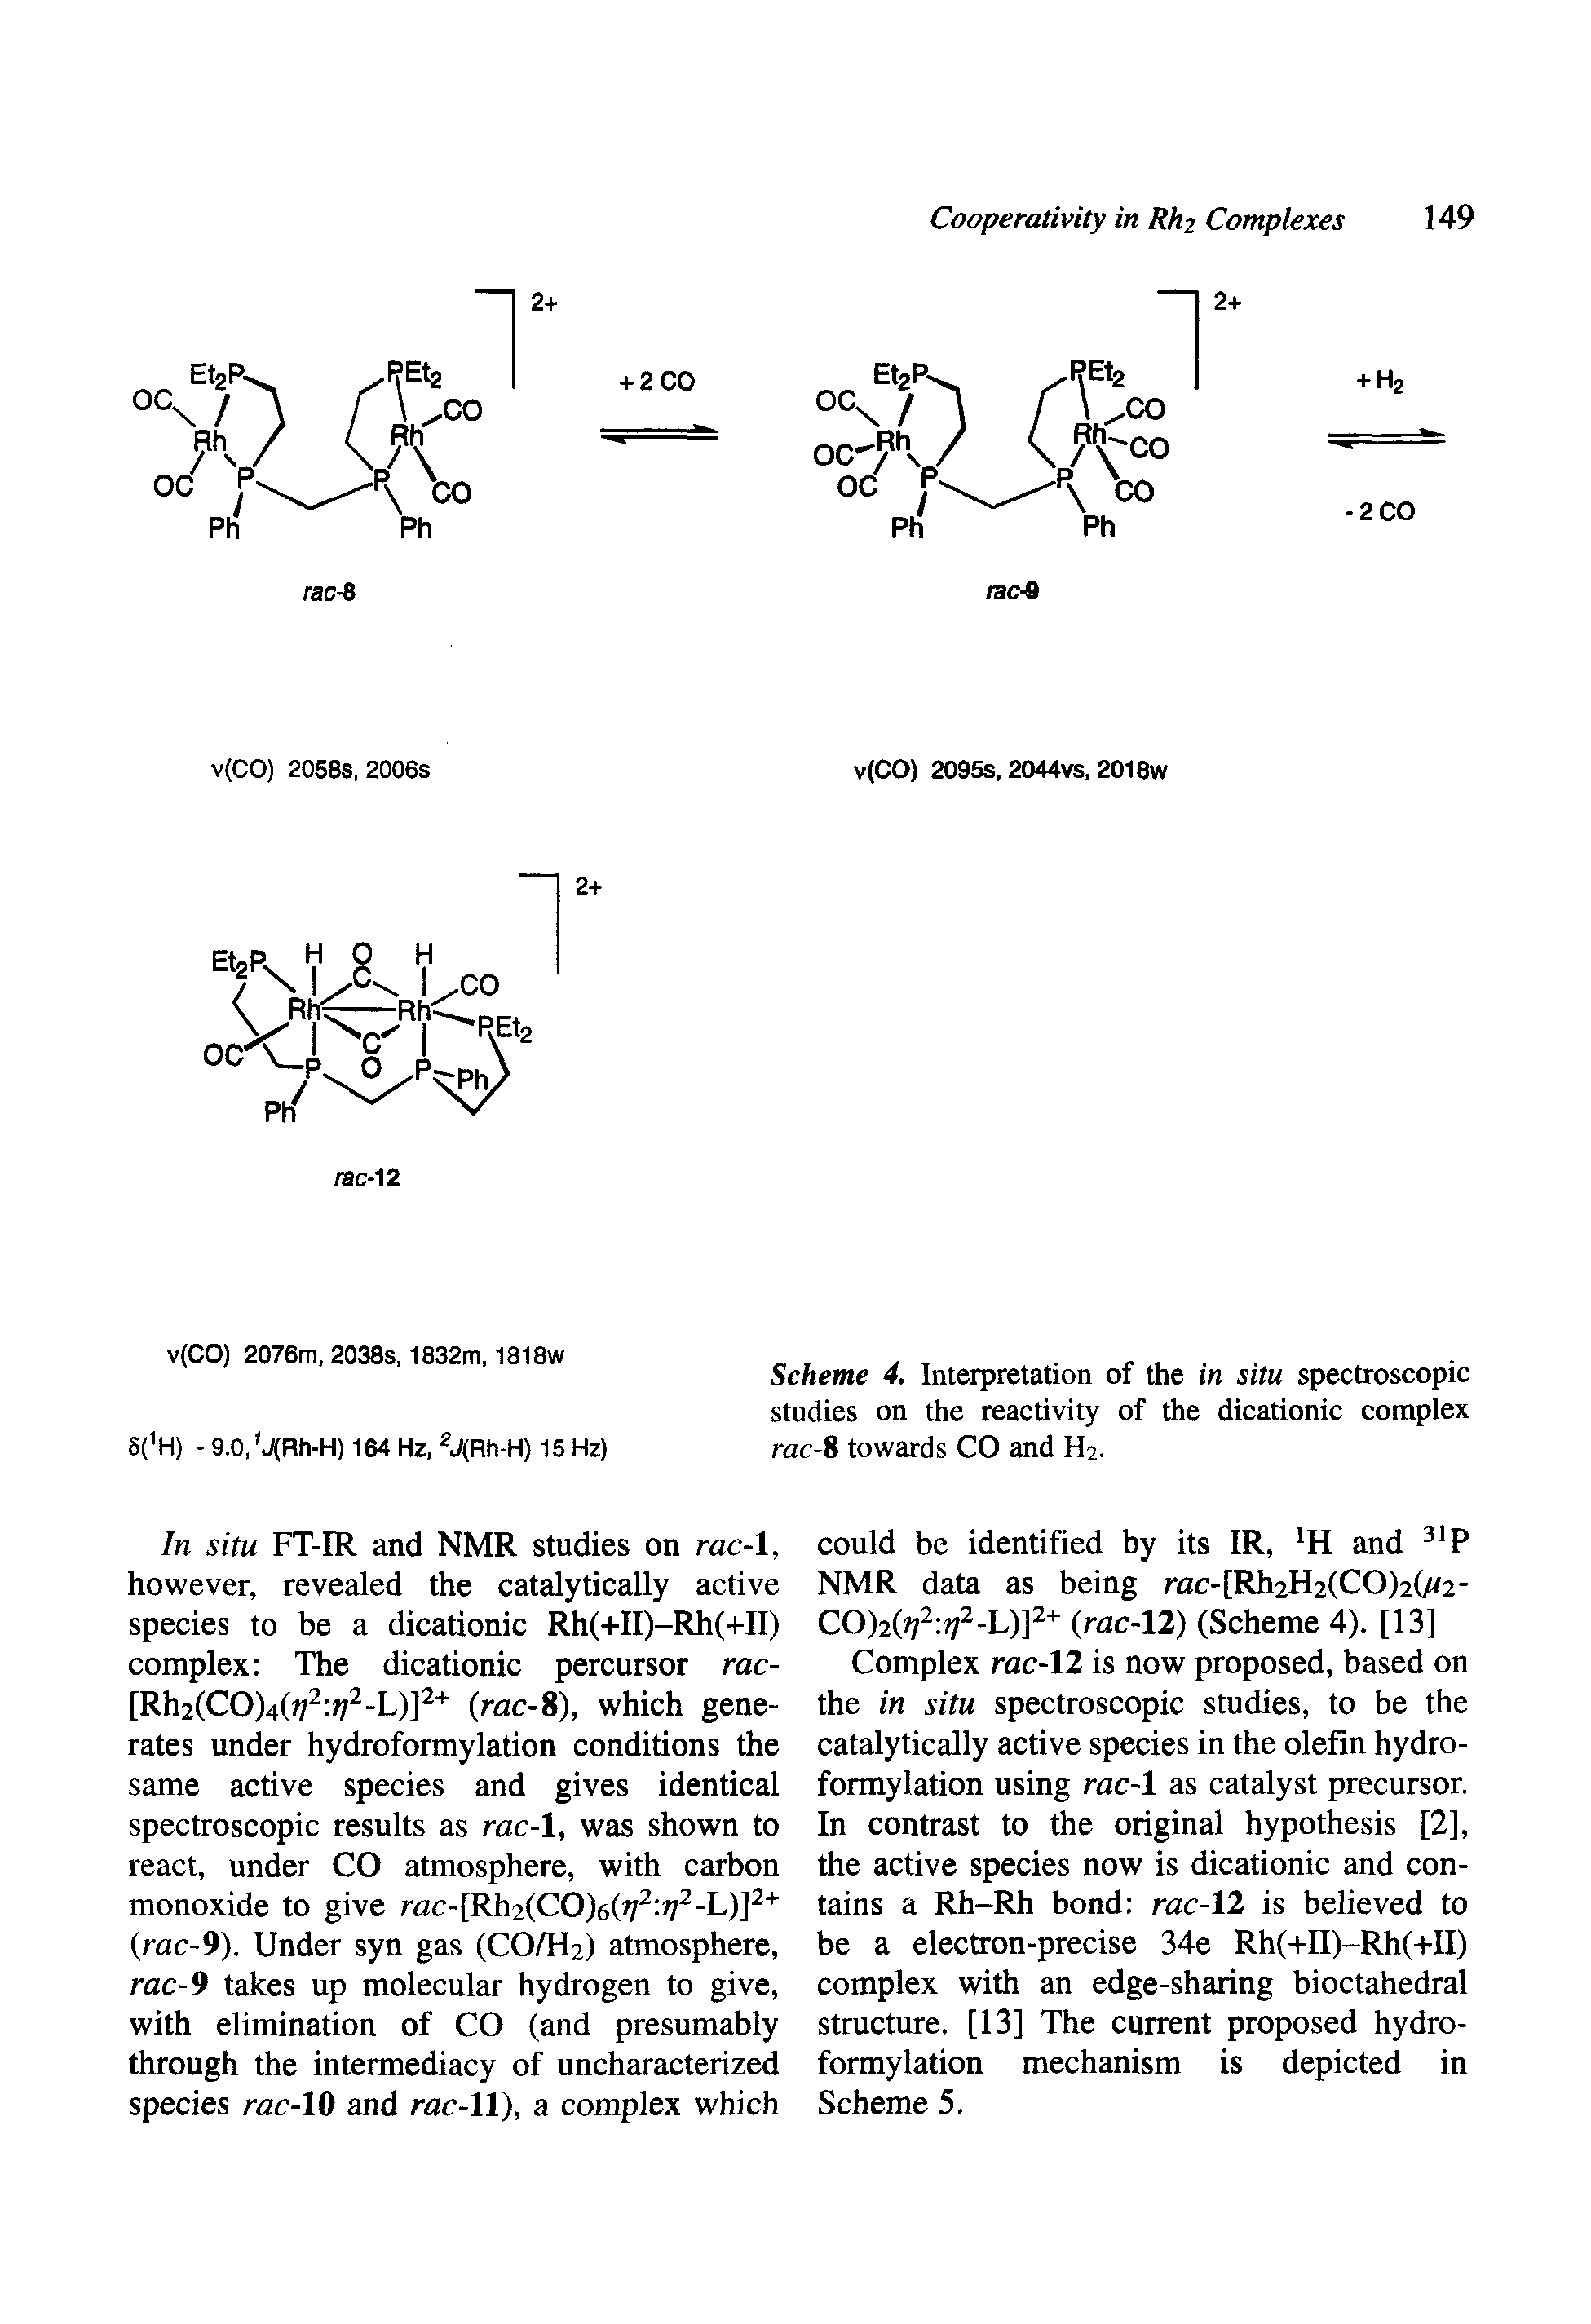 Scheme 4, Interpretation of the in situ spectroscopic studies on the reactivity of the dicationic complex rac-8 towards CO and H2.